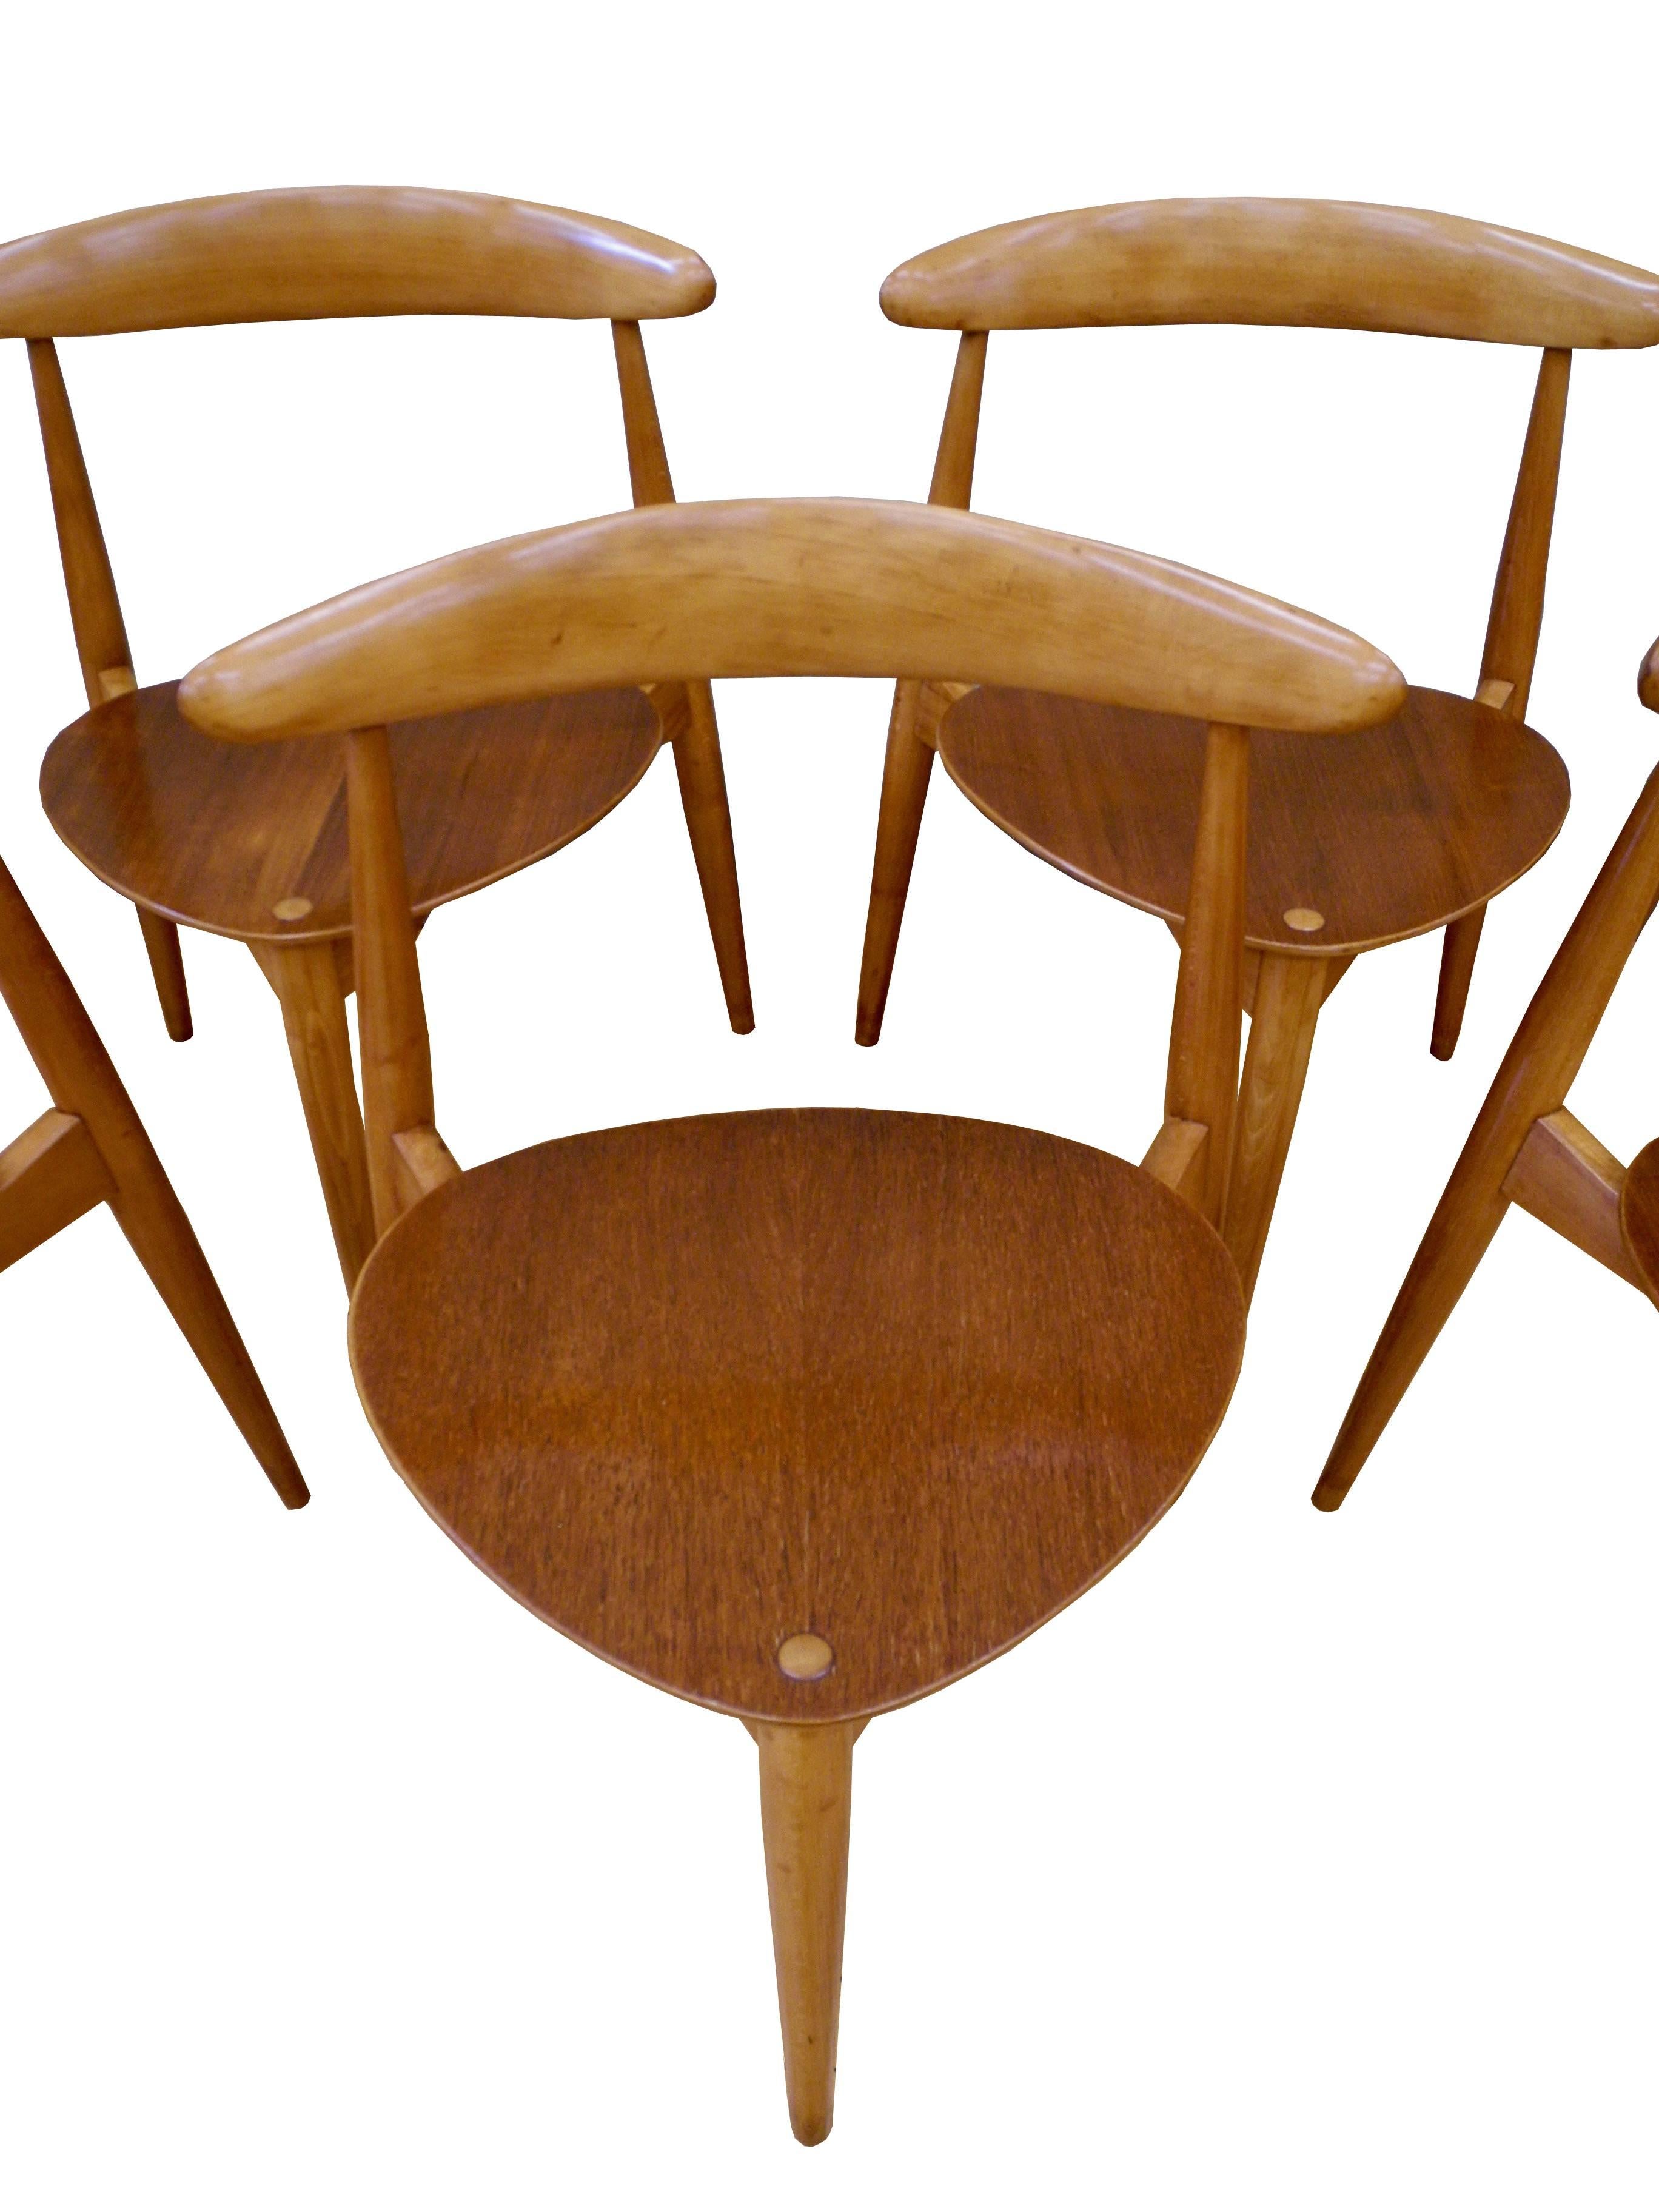 Eight Danish Modern Heart Chairs in Teak and Beech by Hans Wegner In Good Condition For Sale In Hudson, NY